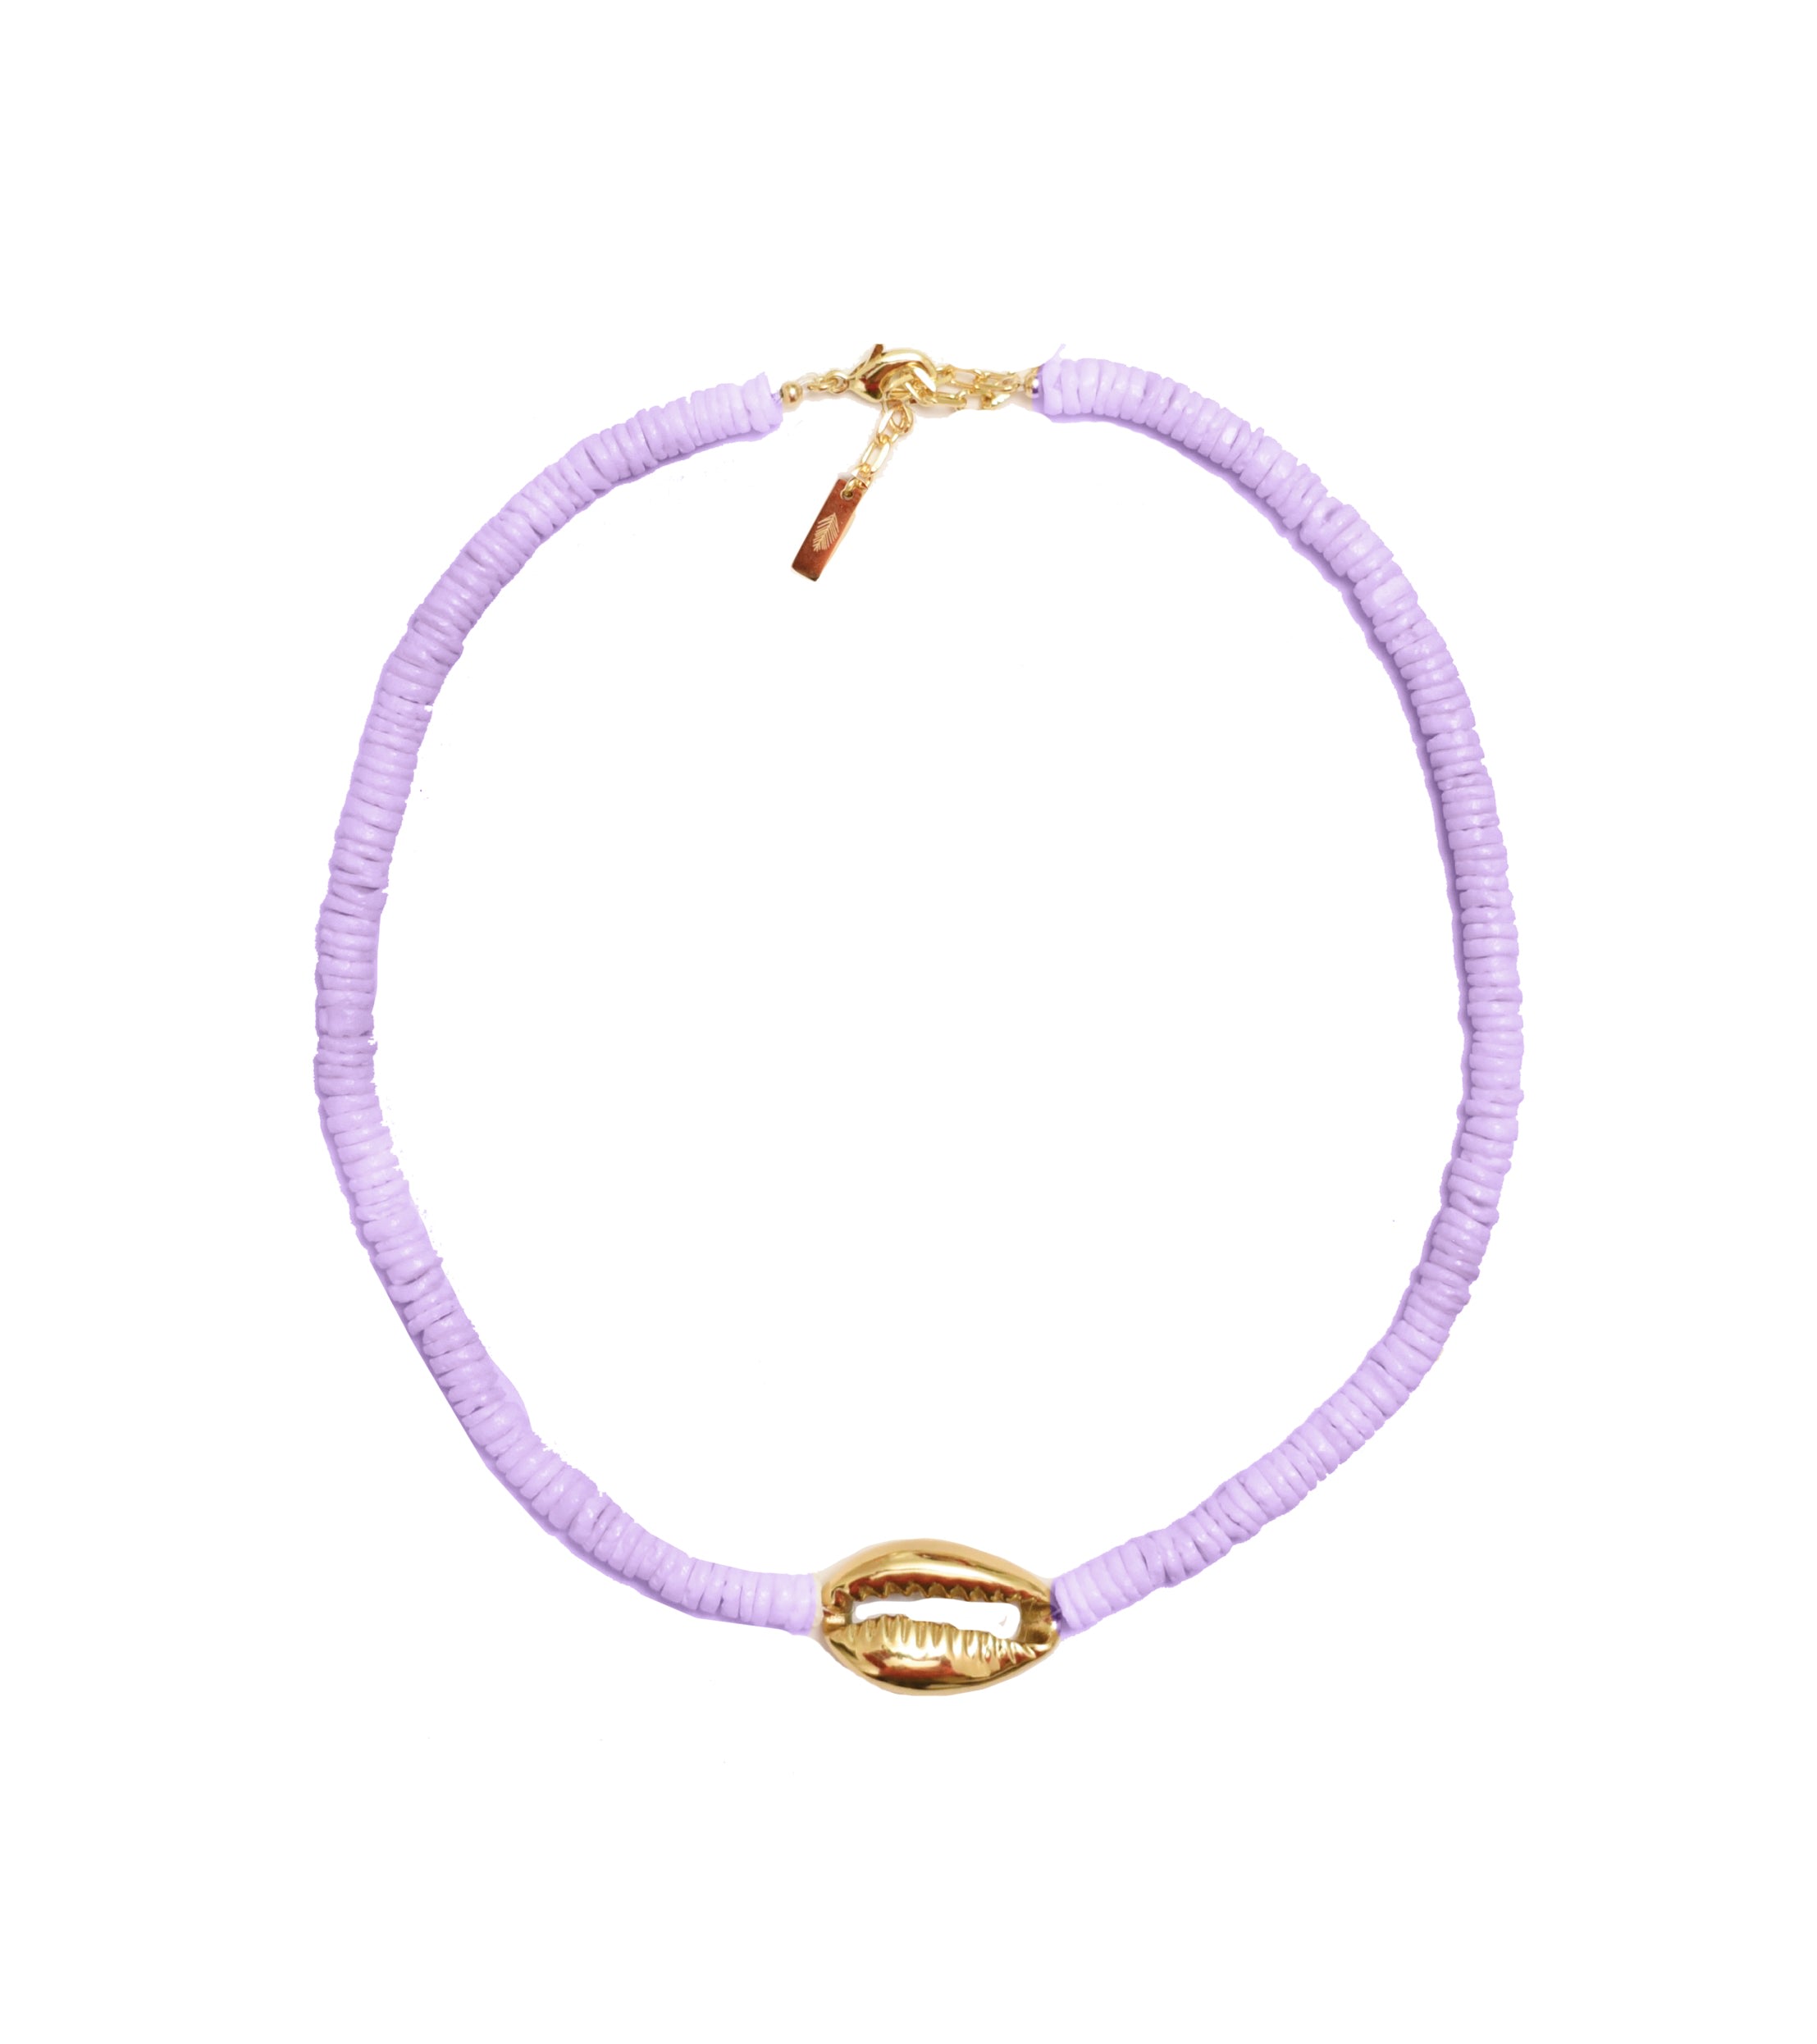 Women’s Heishi Gold Shell Necklace - Lavender Adriana Pappas Designs